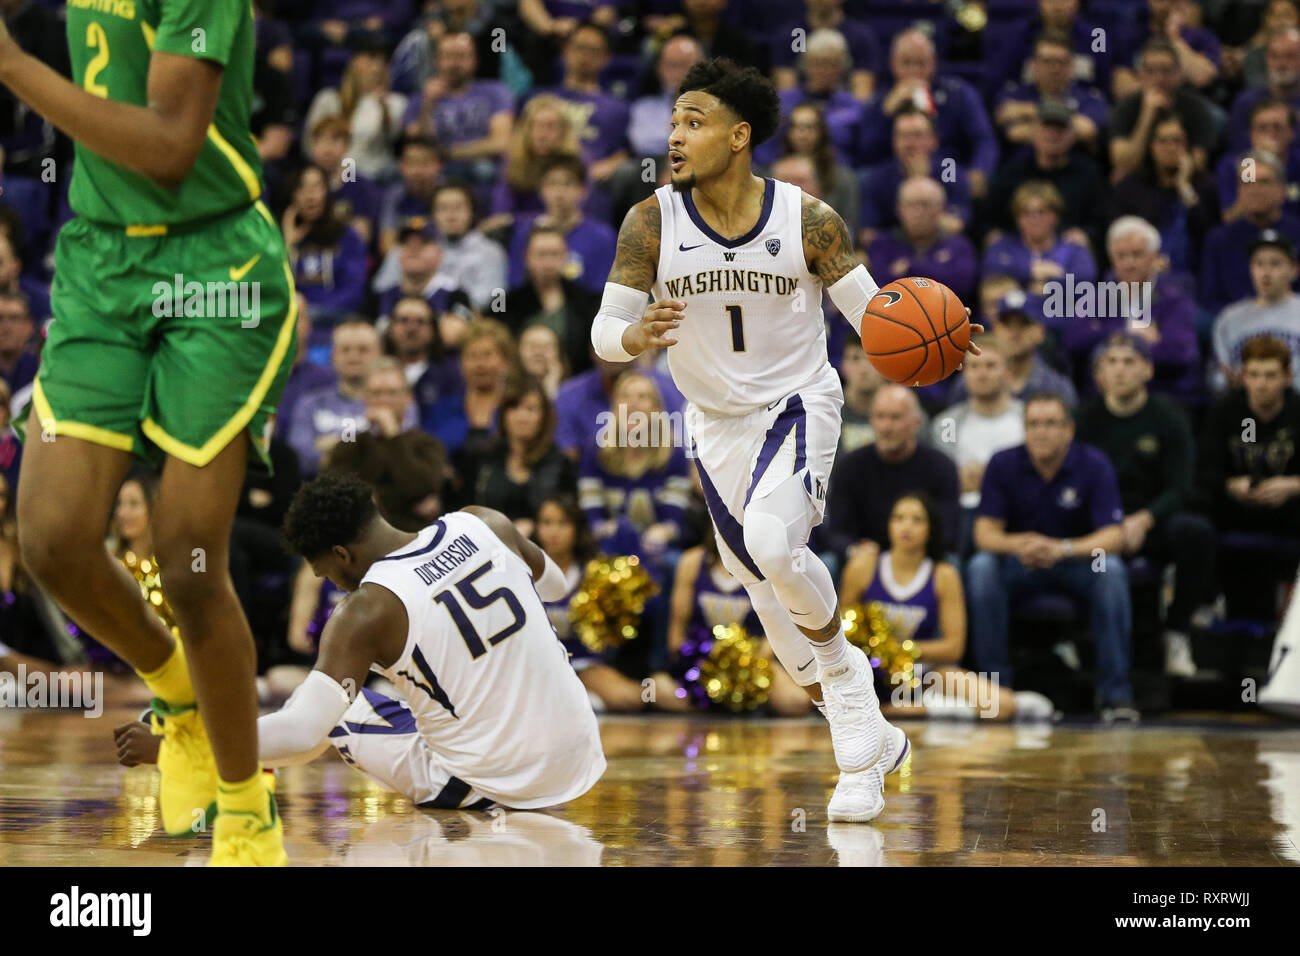 Seattle, WA, USA. 9th Mar, 2019. Washington Huskies guard David Crisp (1) brings the ball up the court during a college men's basketball game between the Oregon Ducks and the Washington Huskies at Alaska Airlines Arena in Seattle, WA. The Ducks defeated the Huskies 55-46. Sean Brown/CSM/Alamy Live News Stock Photo